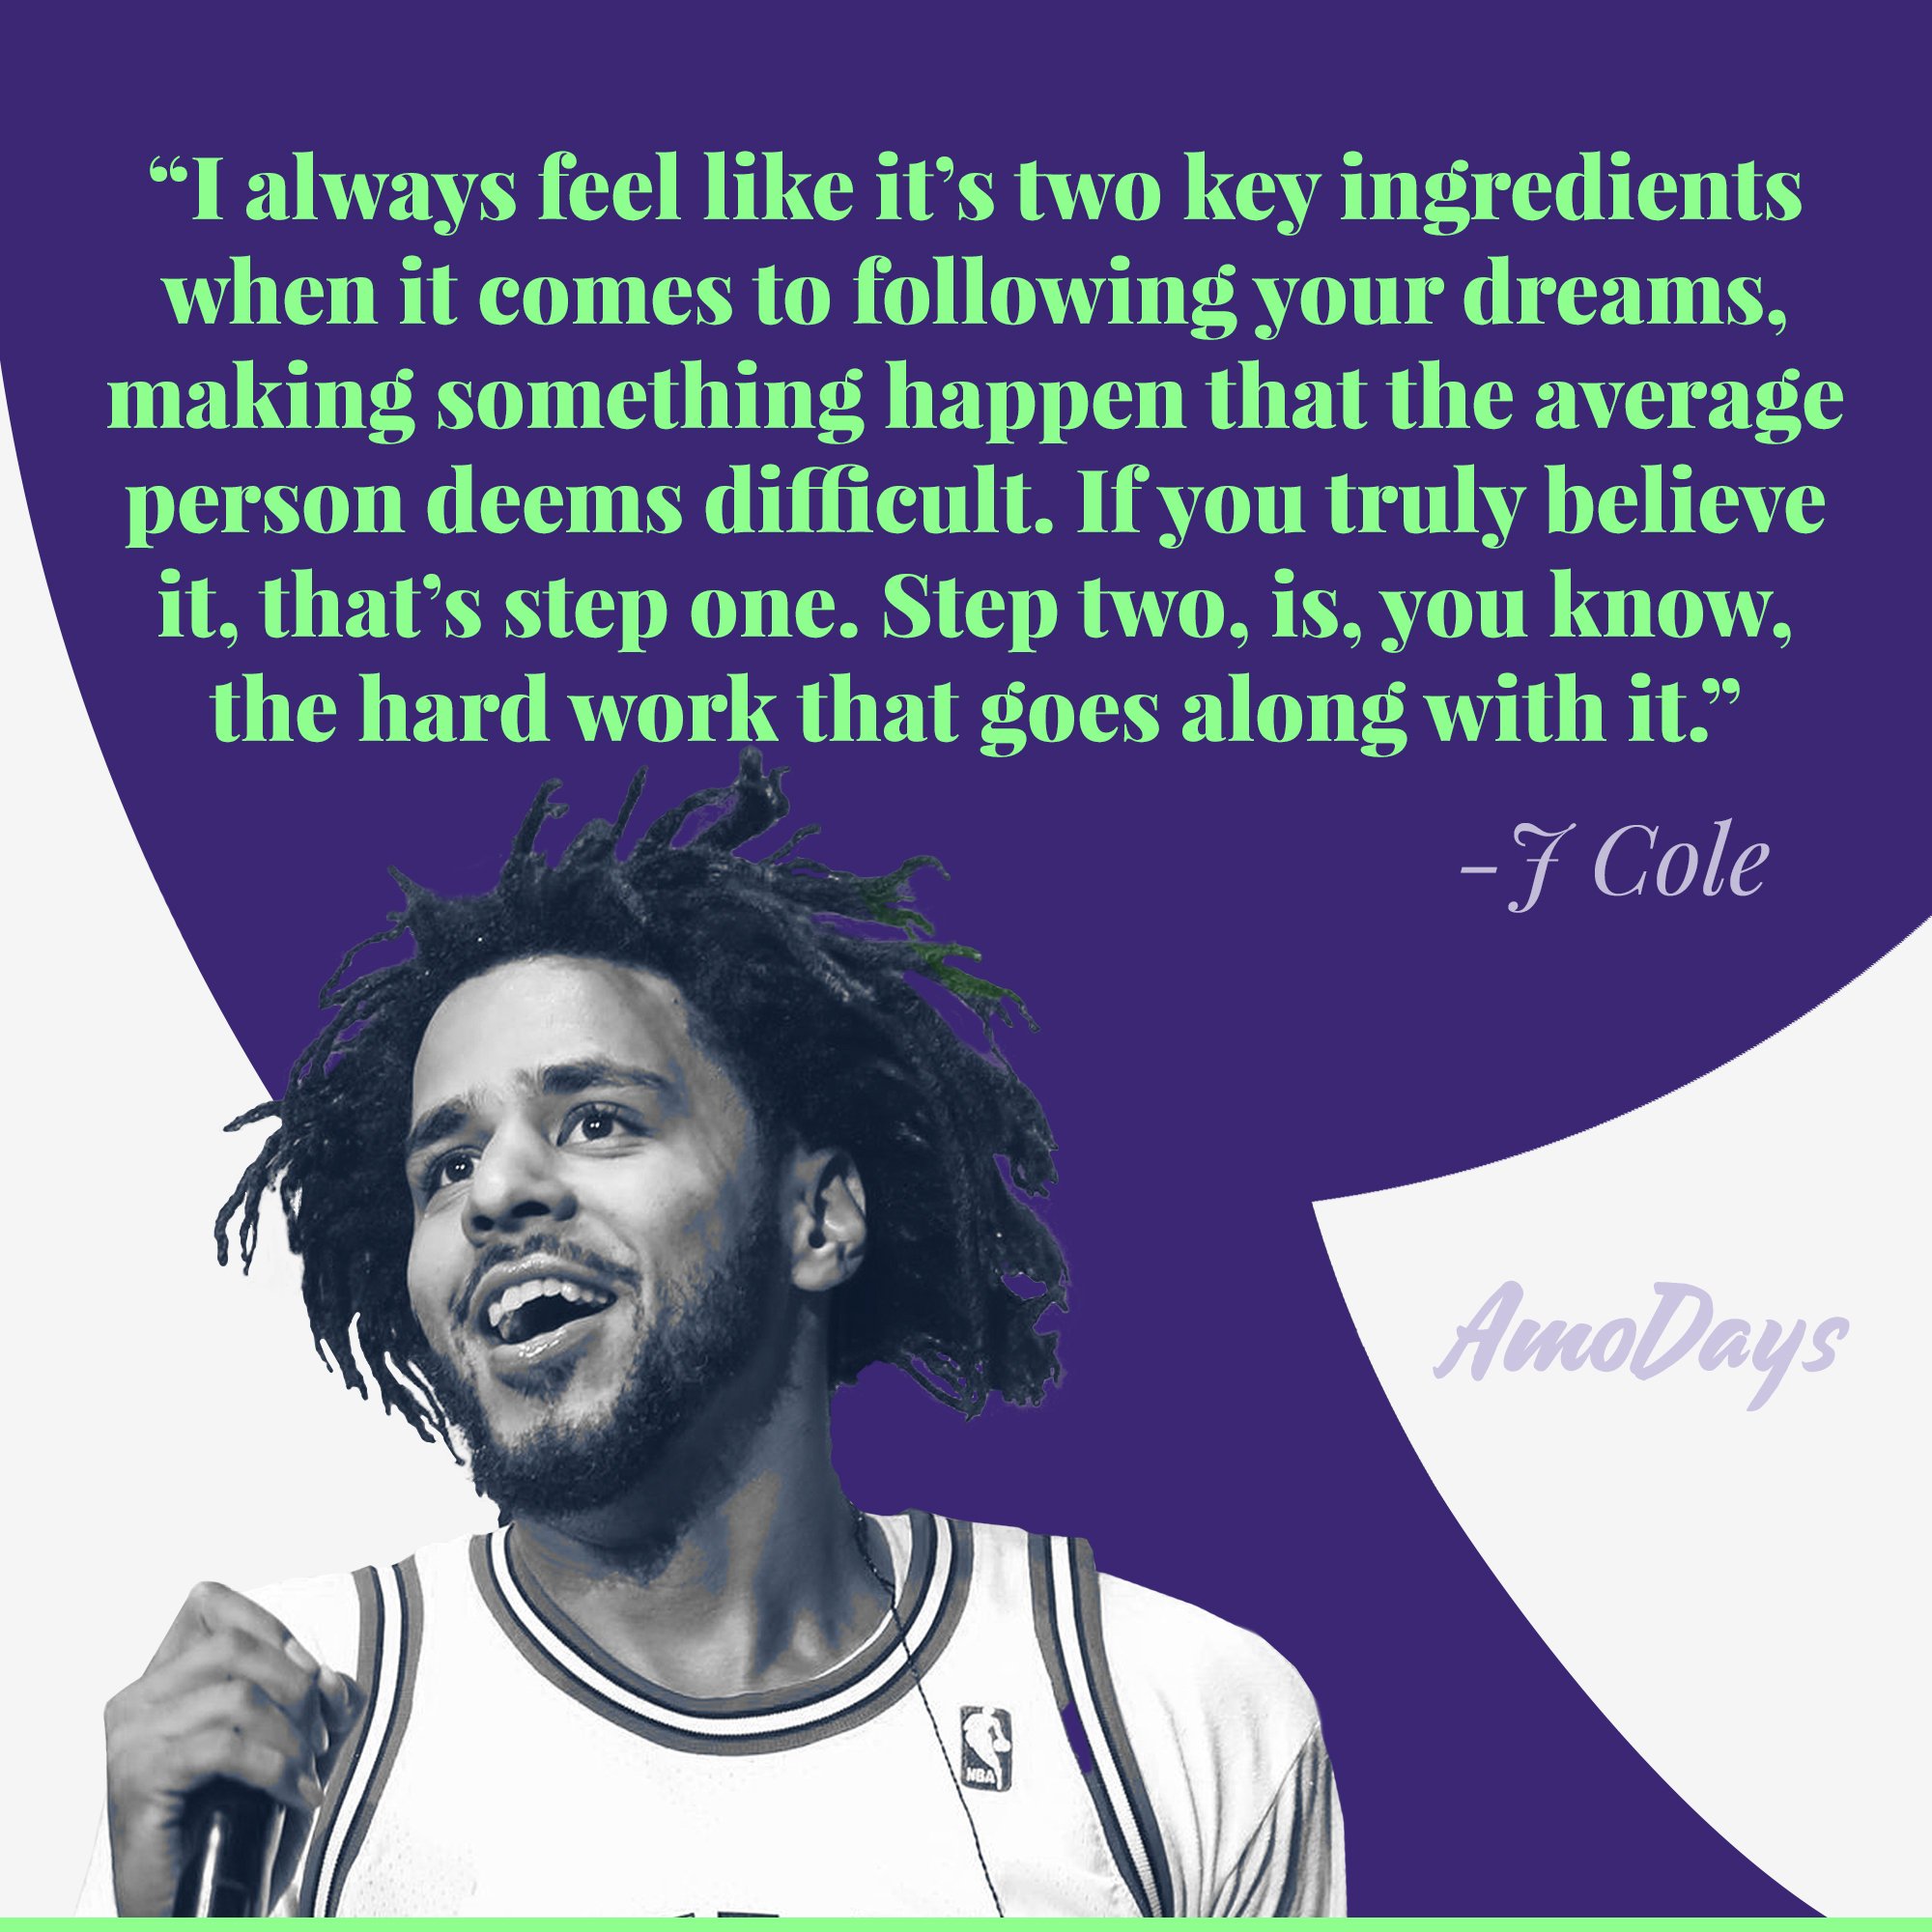 J Cole's quote: “I always feel like it’s two key ingredients when it comes to following your dreams, making something happen that the average person deems difficult. If you truly believe it, that’s step one. Step two, is, you know, the hard work that goes along with it.” | Image: AmoDays